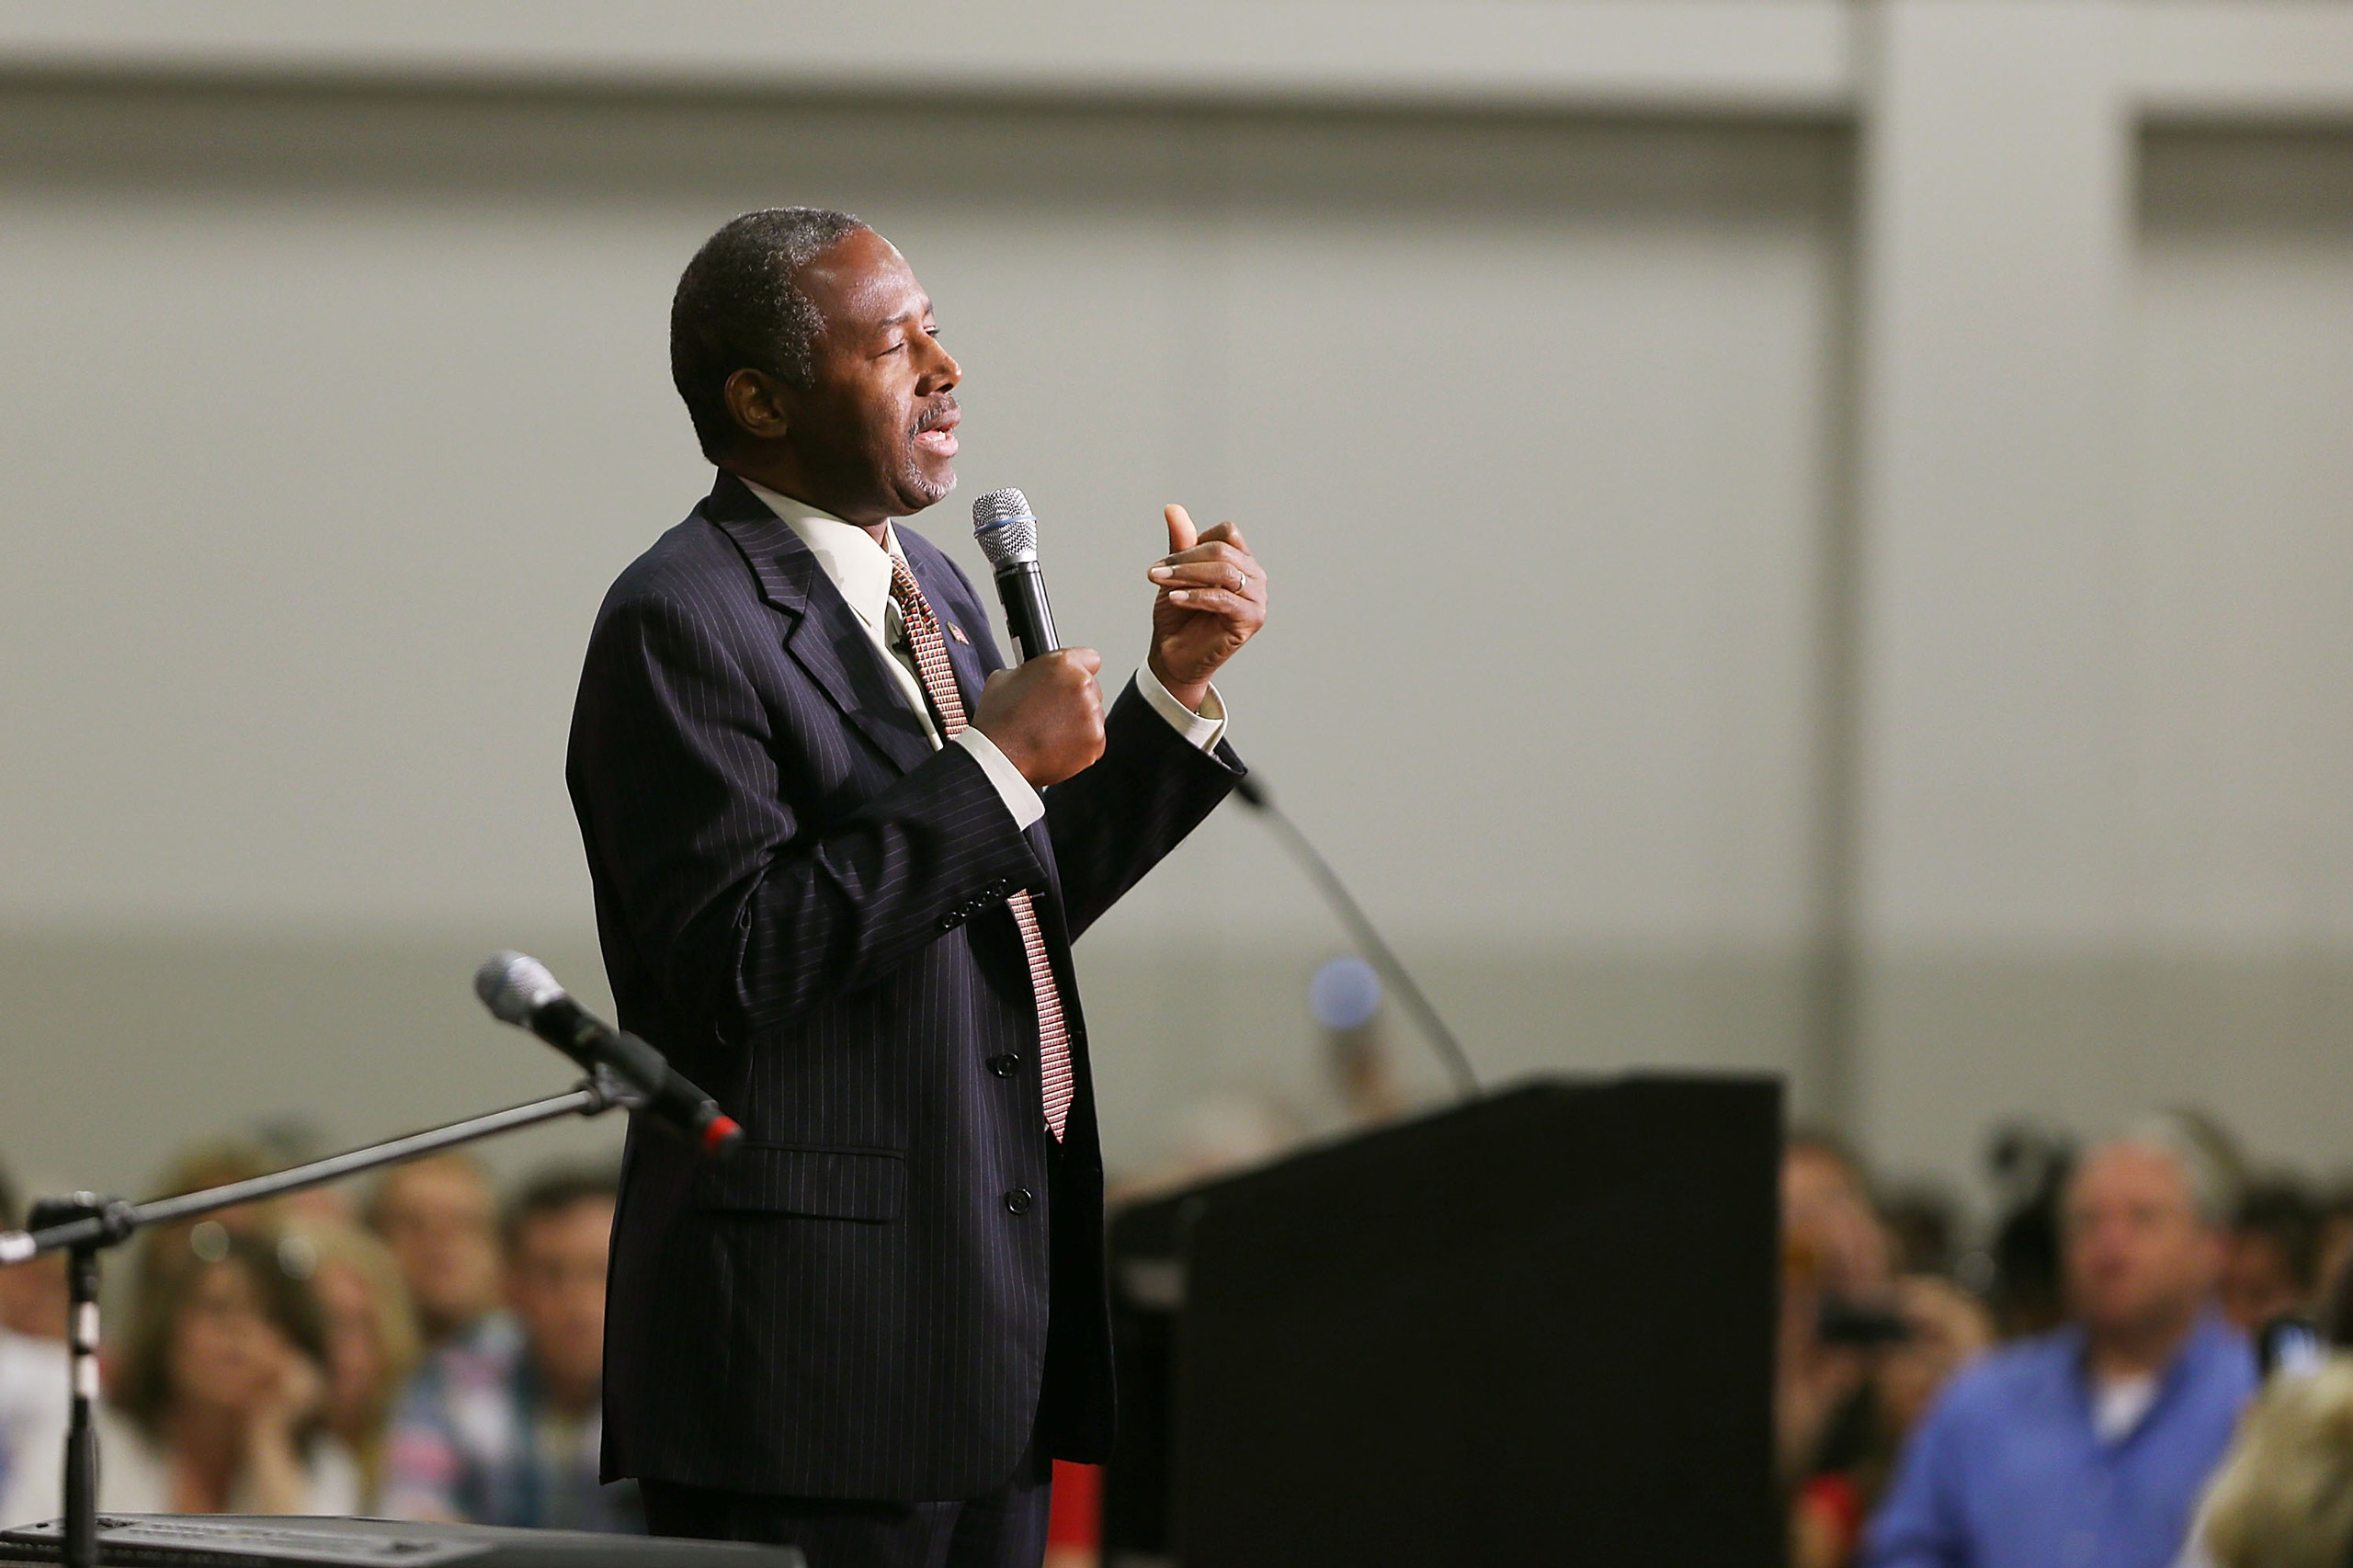 SHARONVILLE, OH - SEPTEMBER 22:  Republican presidential candidate Dr. Ben Carson speaks at a campaign rally on September 22, 2015 in Sharonville, Ohio. Carson came under criticism after expressing his view that he would not support putting "a Muslim in charge of this nation".  (Photo by Mark Lyons/Getty Images)